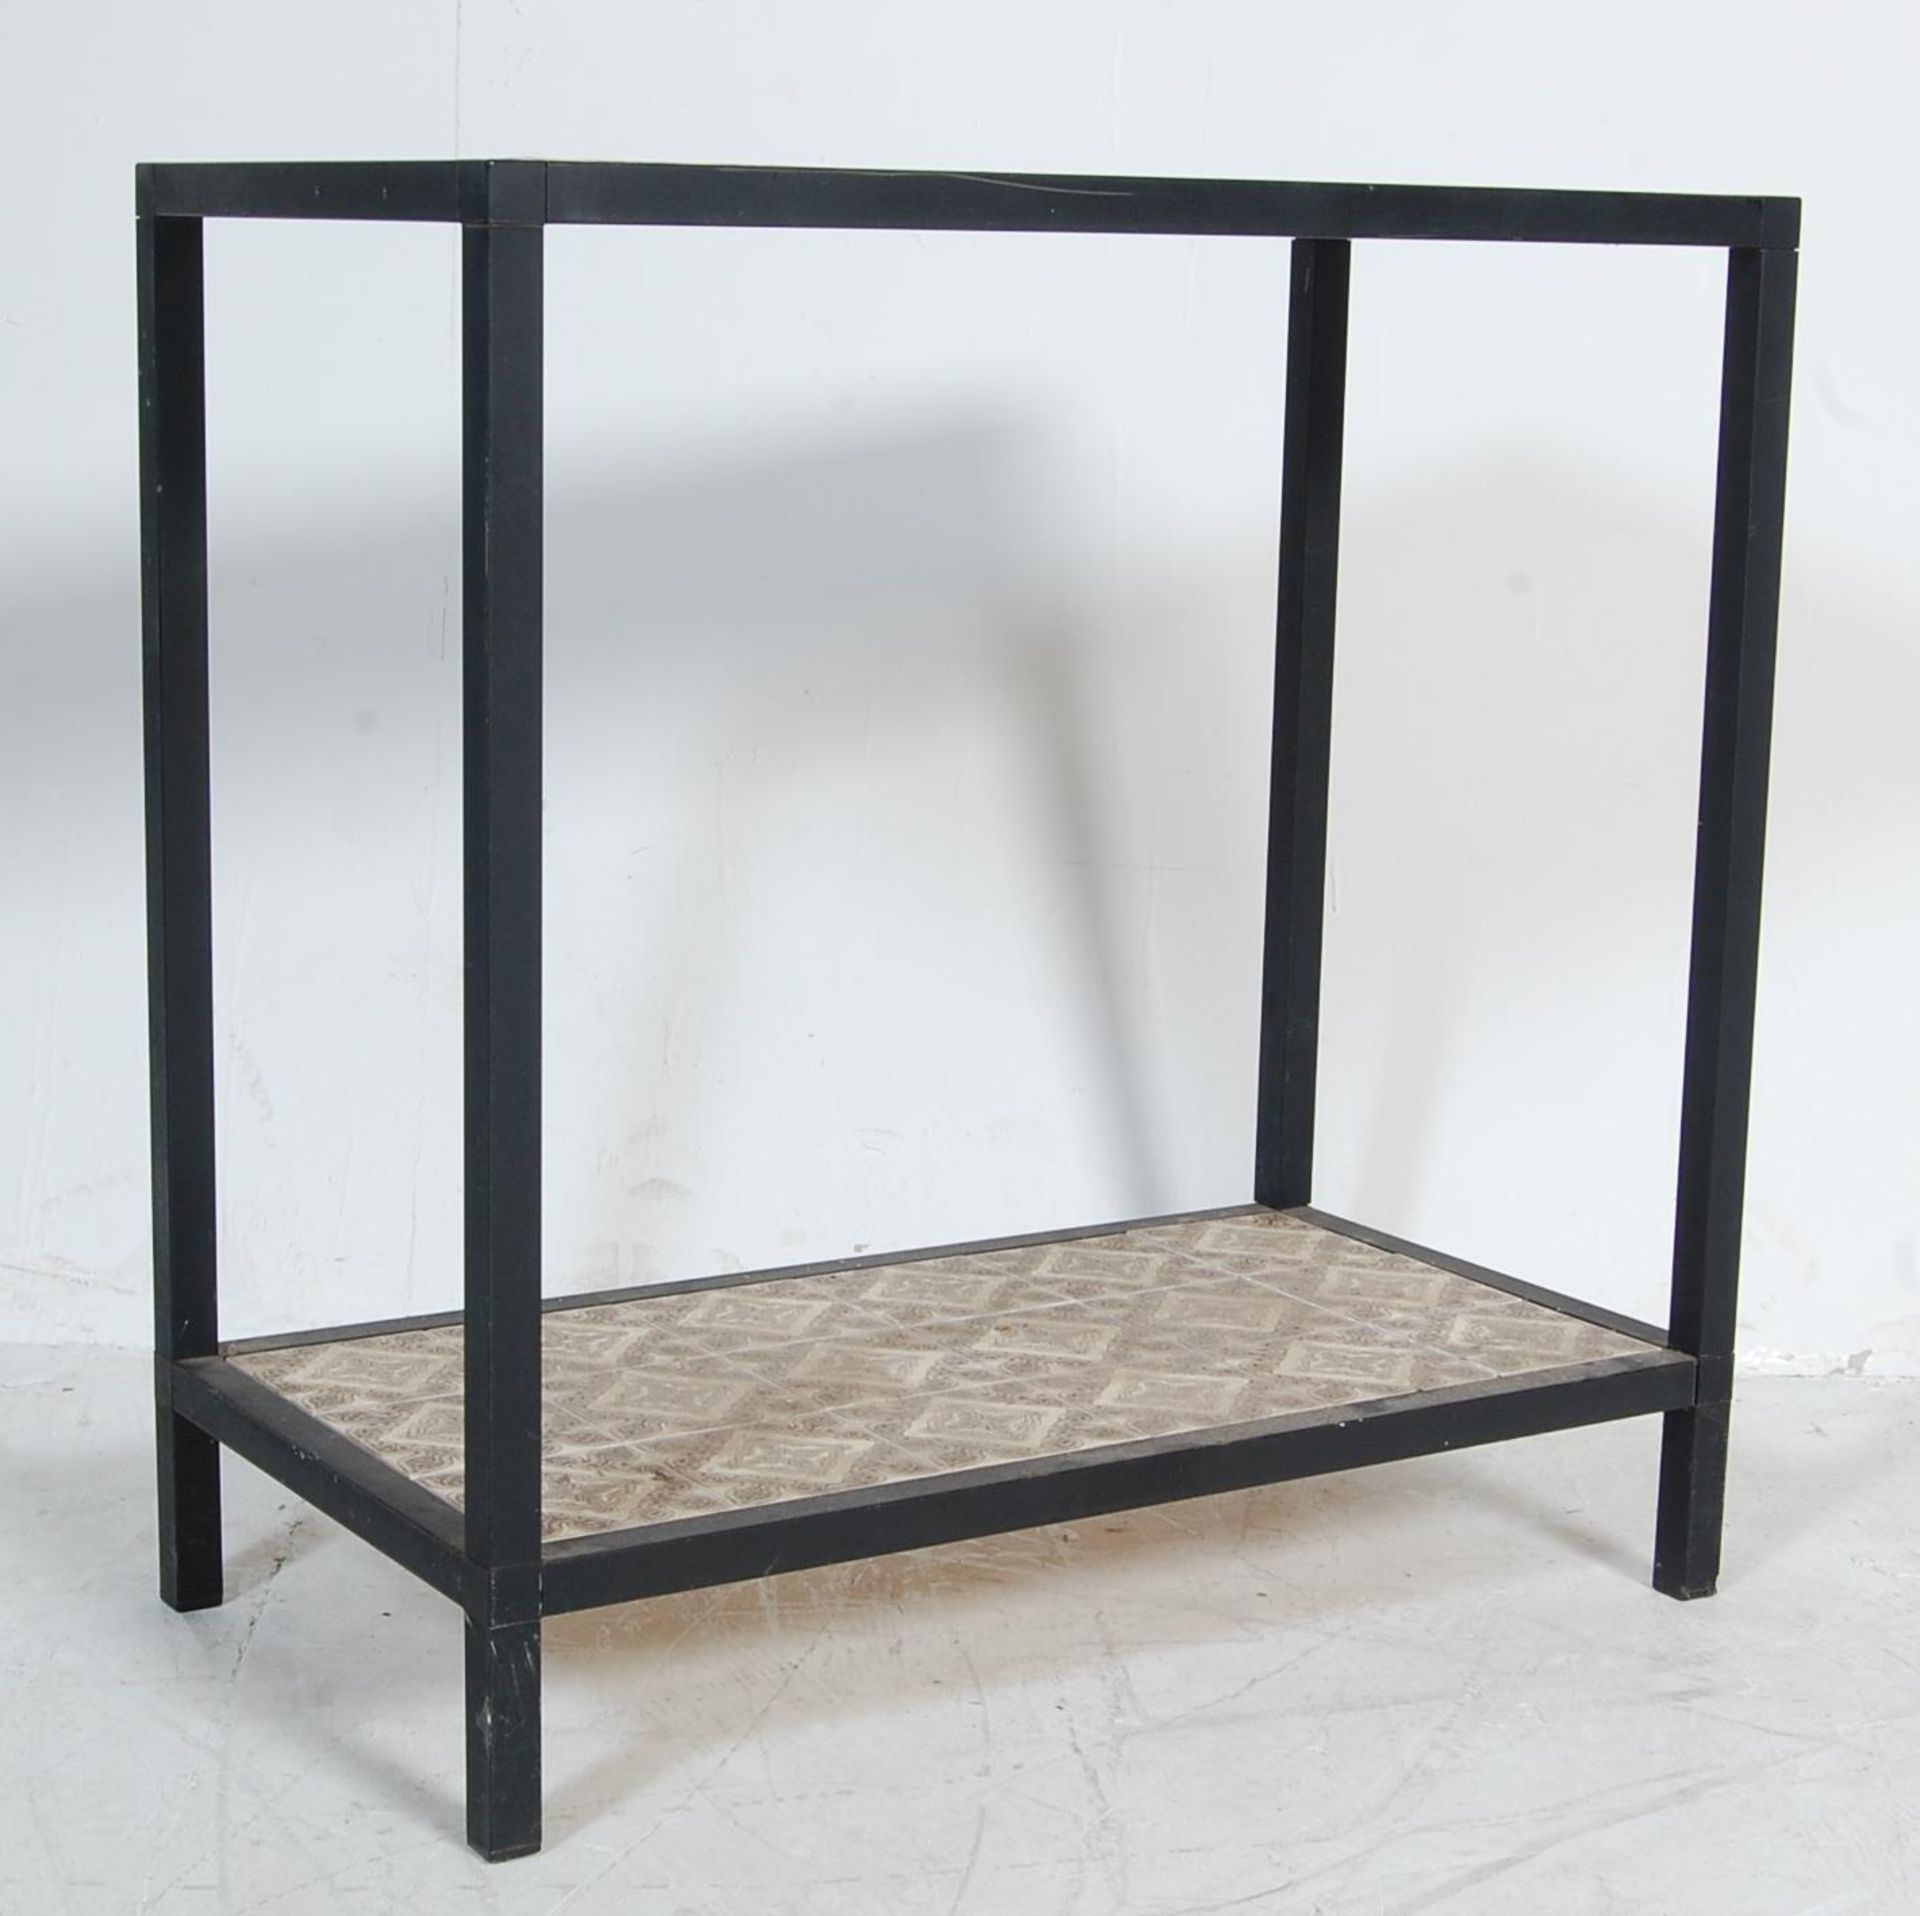 RETRO 20TH CENTURY METAL FRAME & TILE TOP PLANT STAND